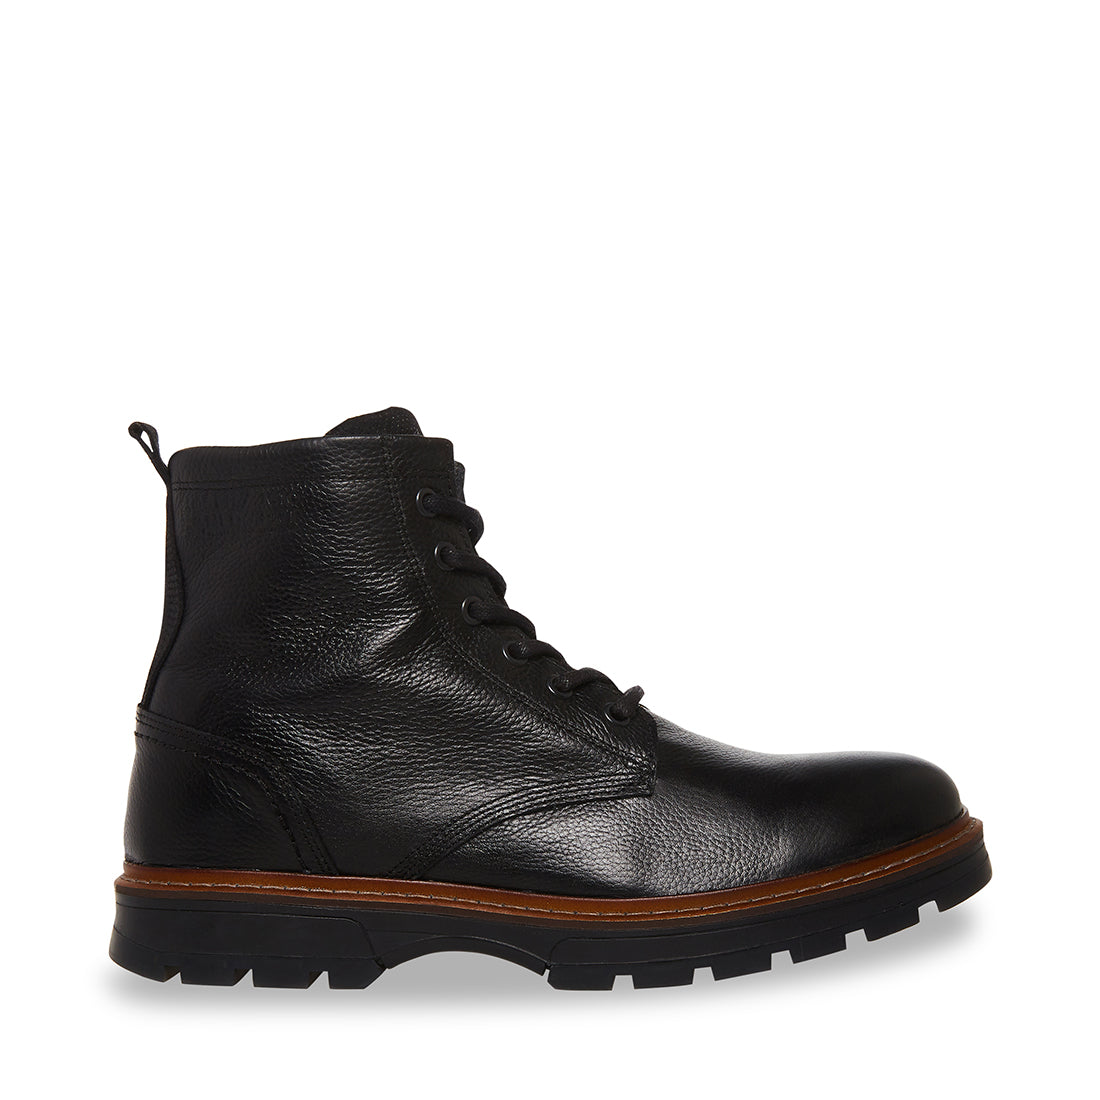 LUCIUS Black Leather Lace Up Combat Boot | Men's Boots – Steve Madden